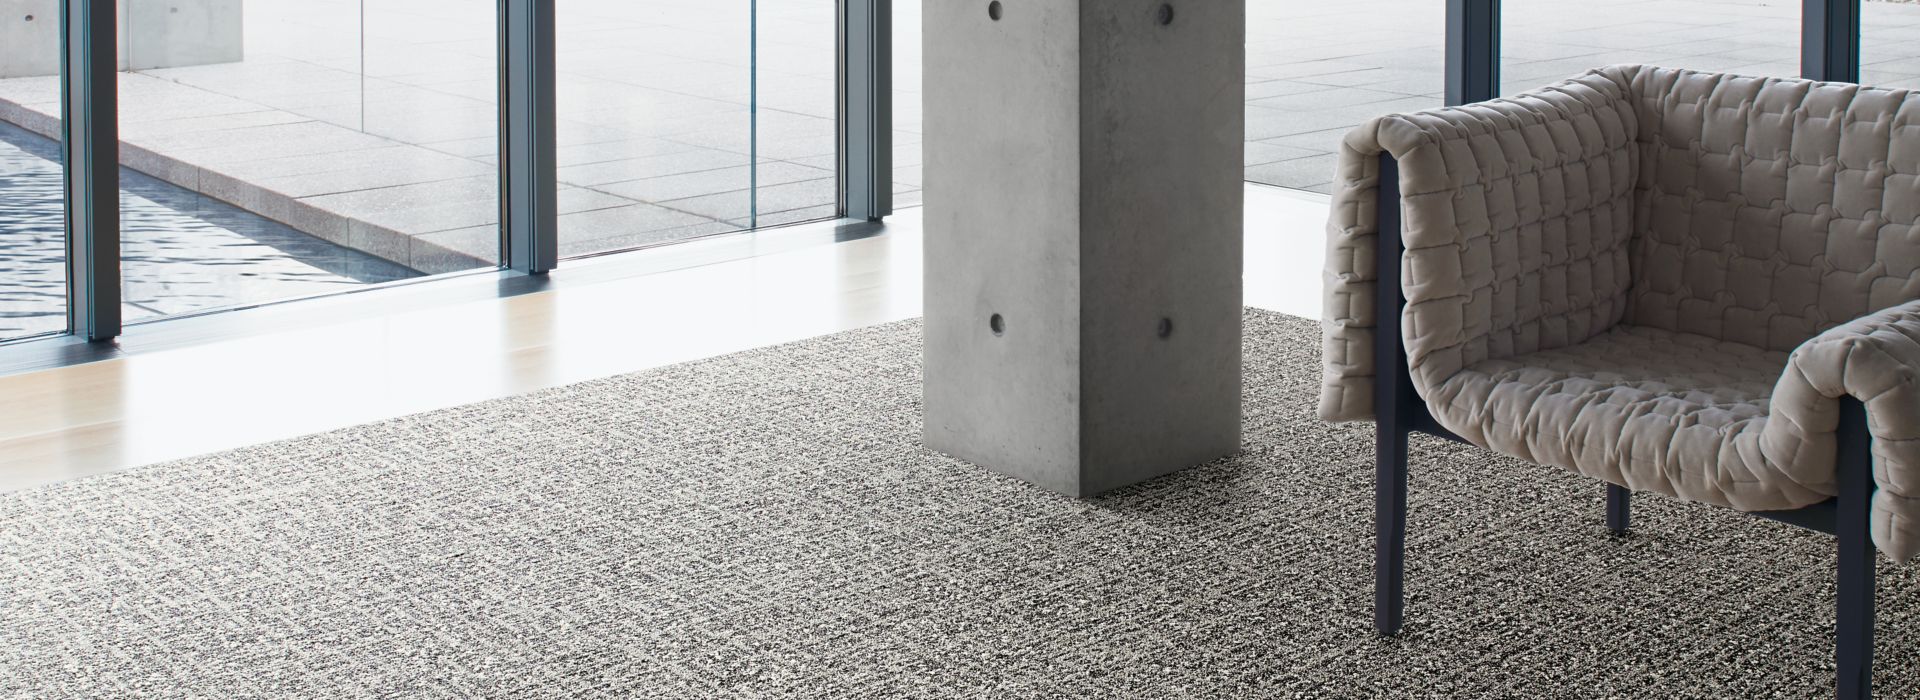 Interface WW890 plank carpet tile and Textured Stones LVT in lobby area with chair numéro d’image 1